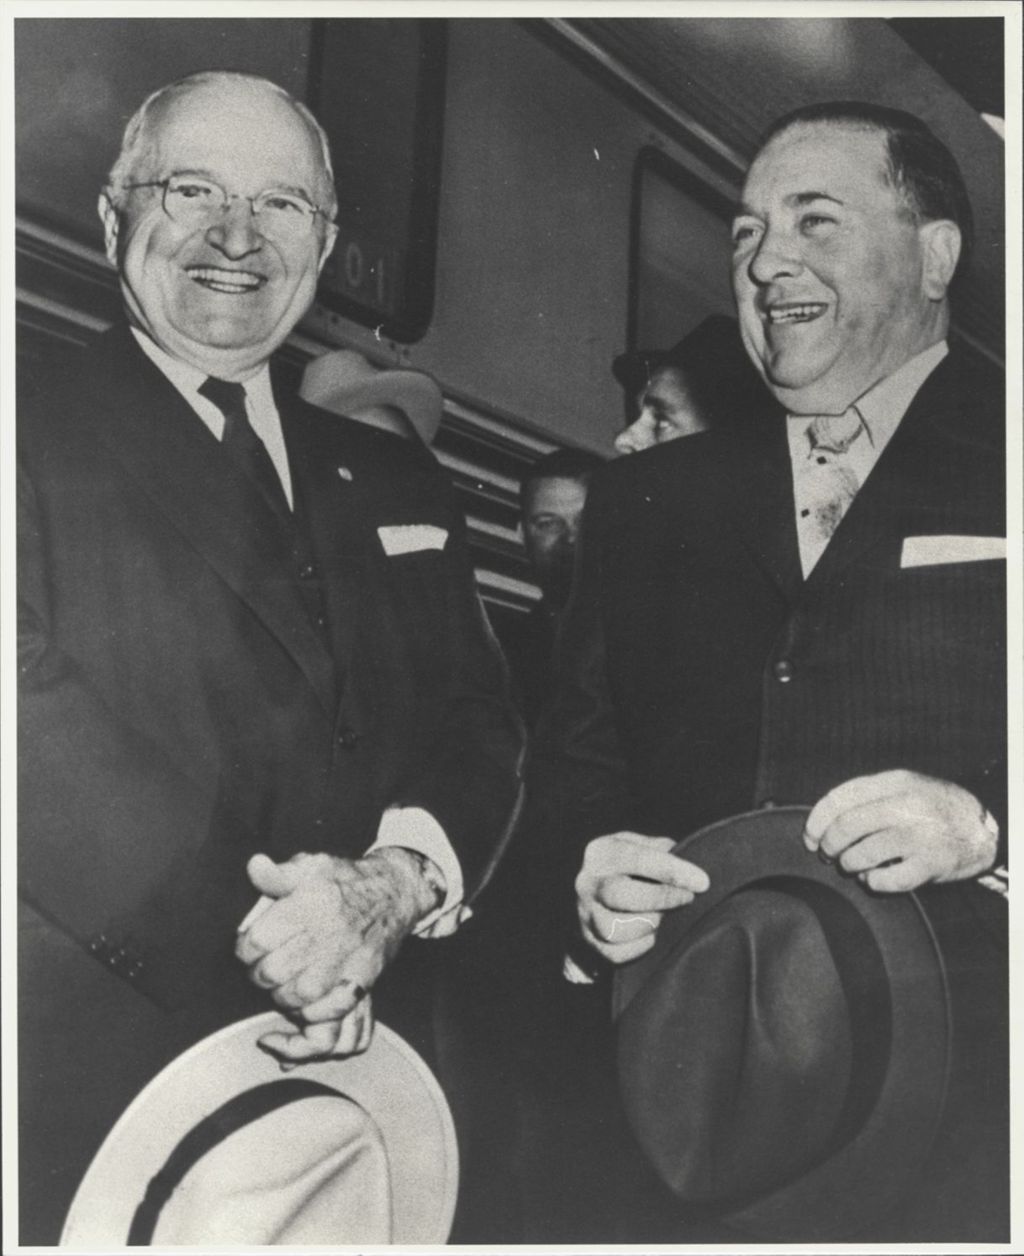 Harry S. Truman and Richard J. Daley sharing a laugh